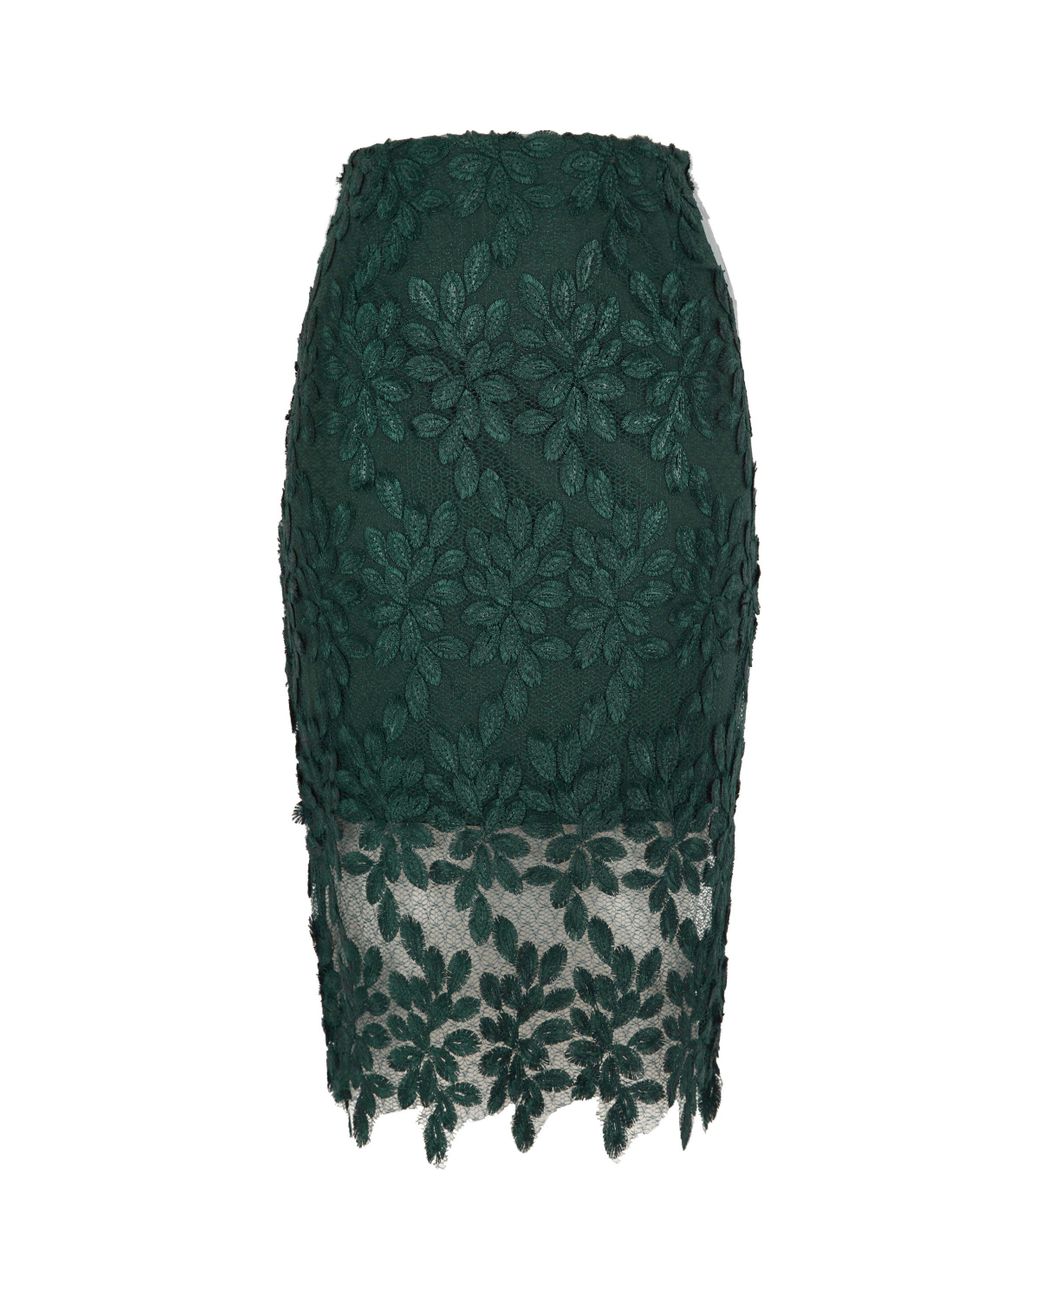 OUTFIT OF THE DAY  Emerald Green Lace Skirt - LilyLike Blog